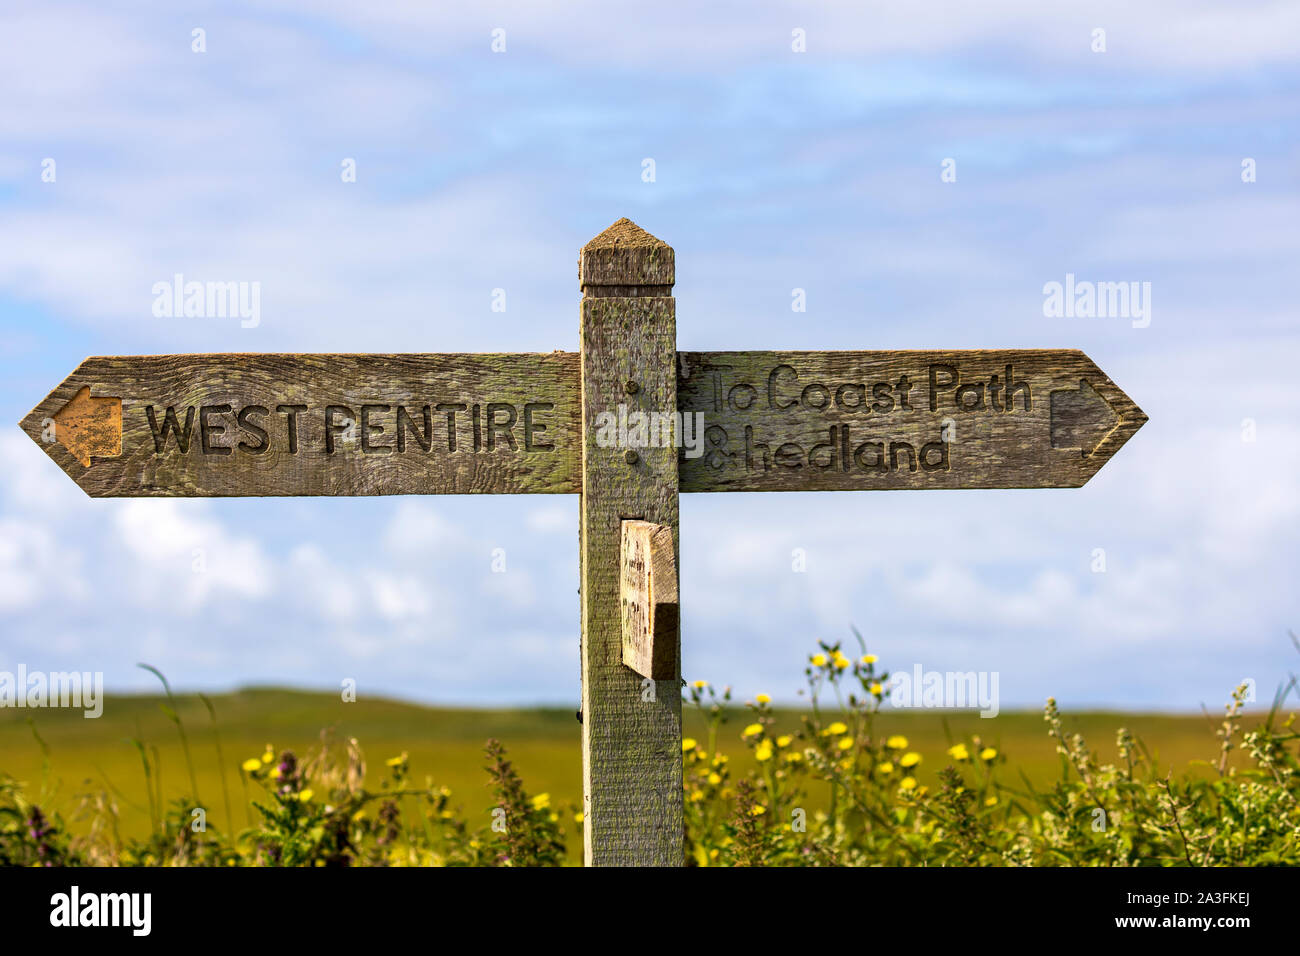 A Coastal path walking oak walking sign showing directions to West Pentire and To Coast Path Headland near Crantock Bay, Cornwall, UK Stock Photo